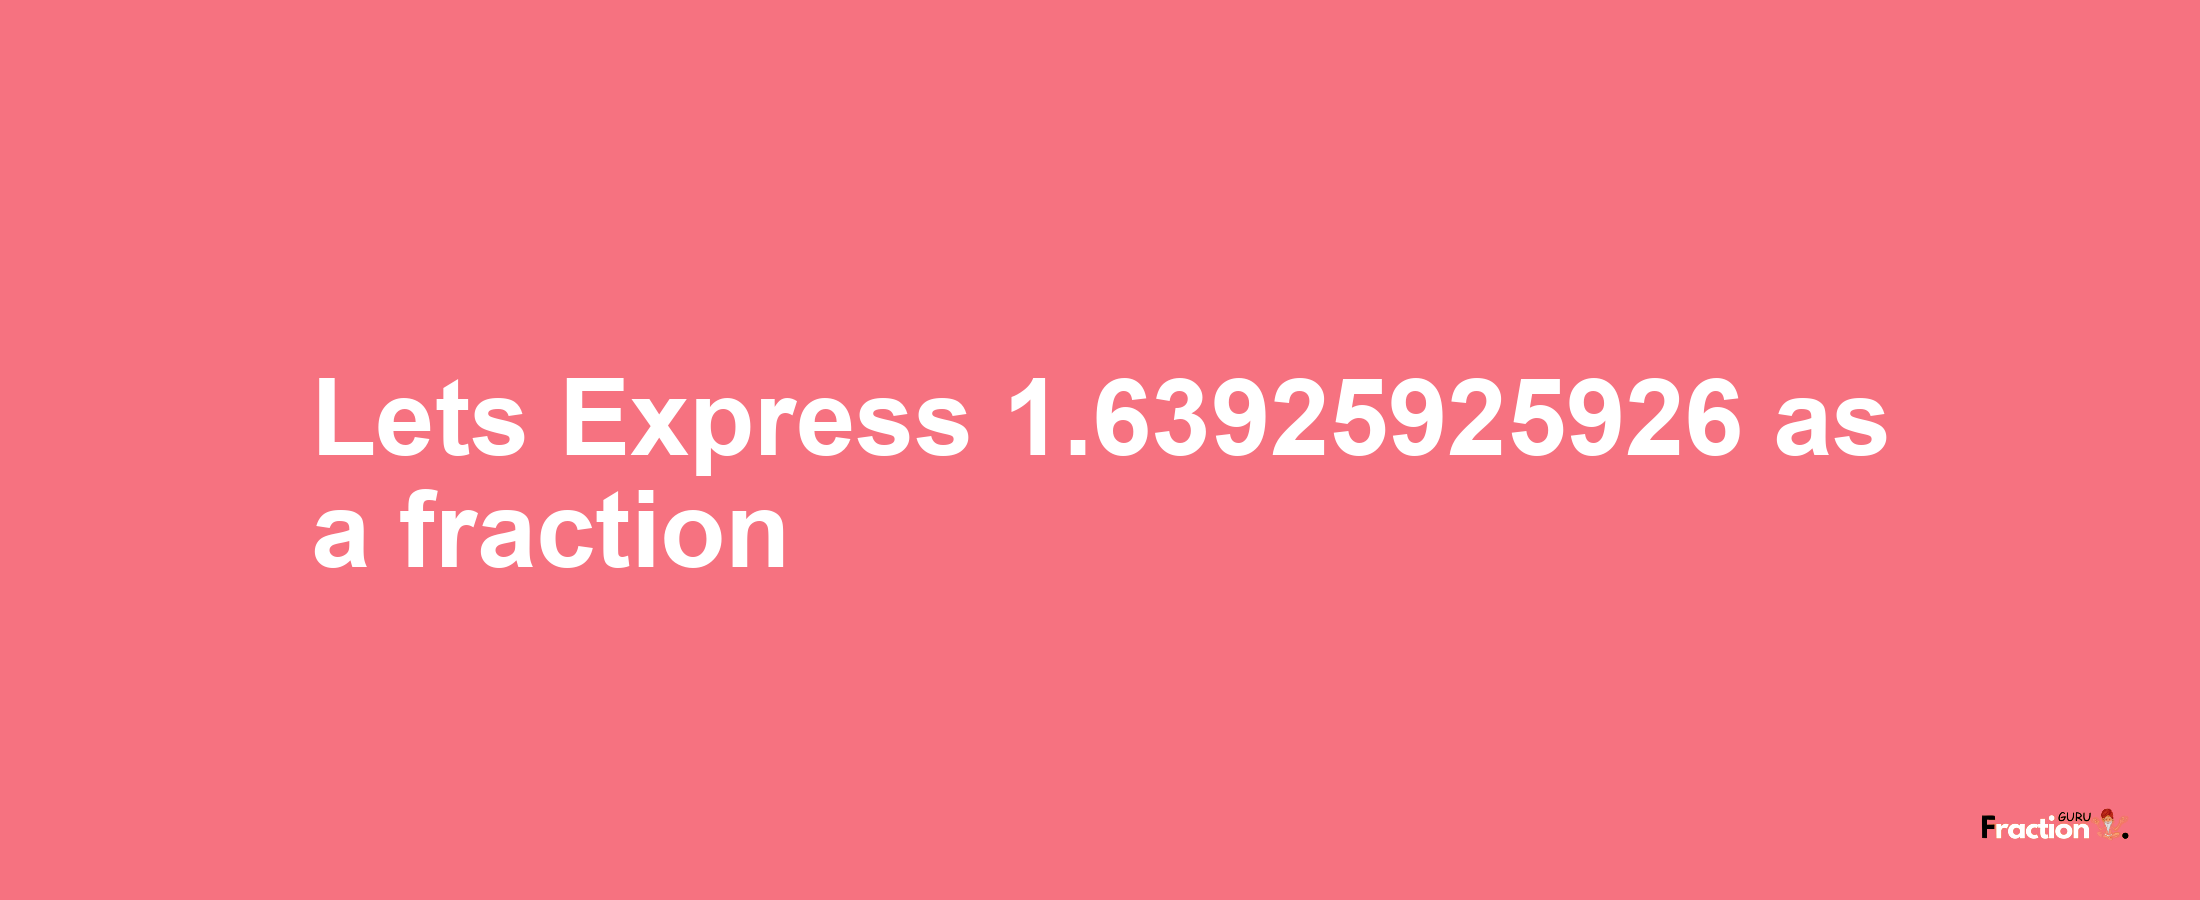 Lets Express 1.63925925926 as afraction